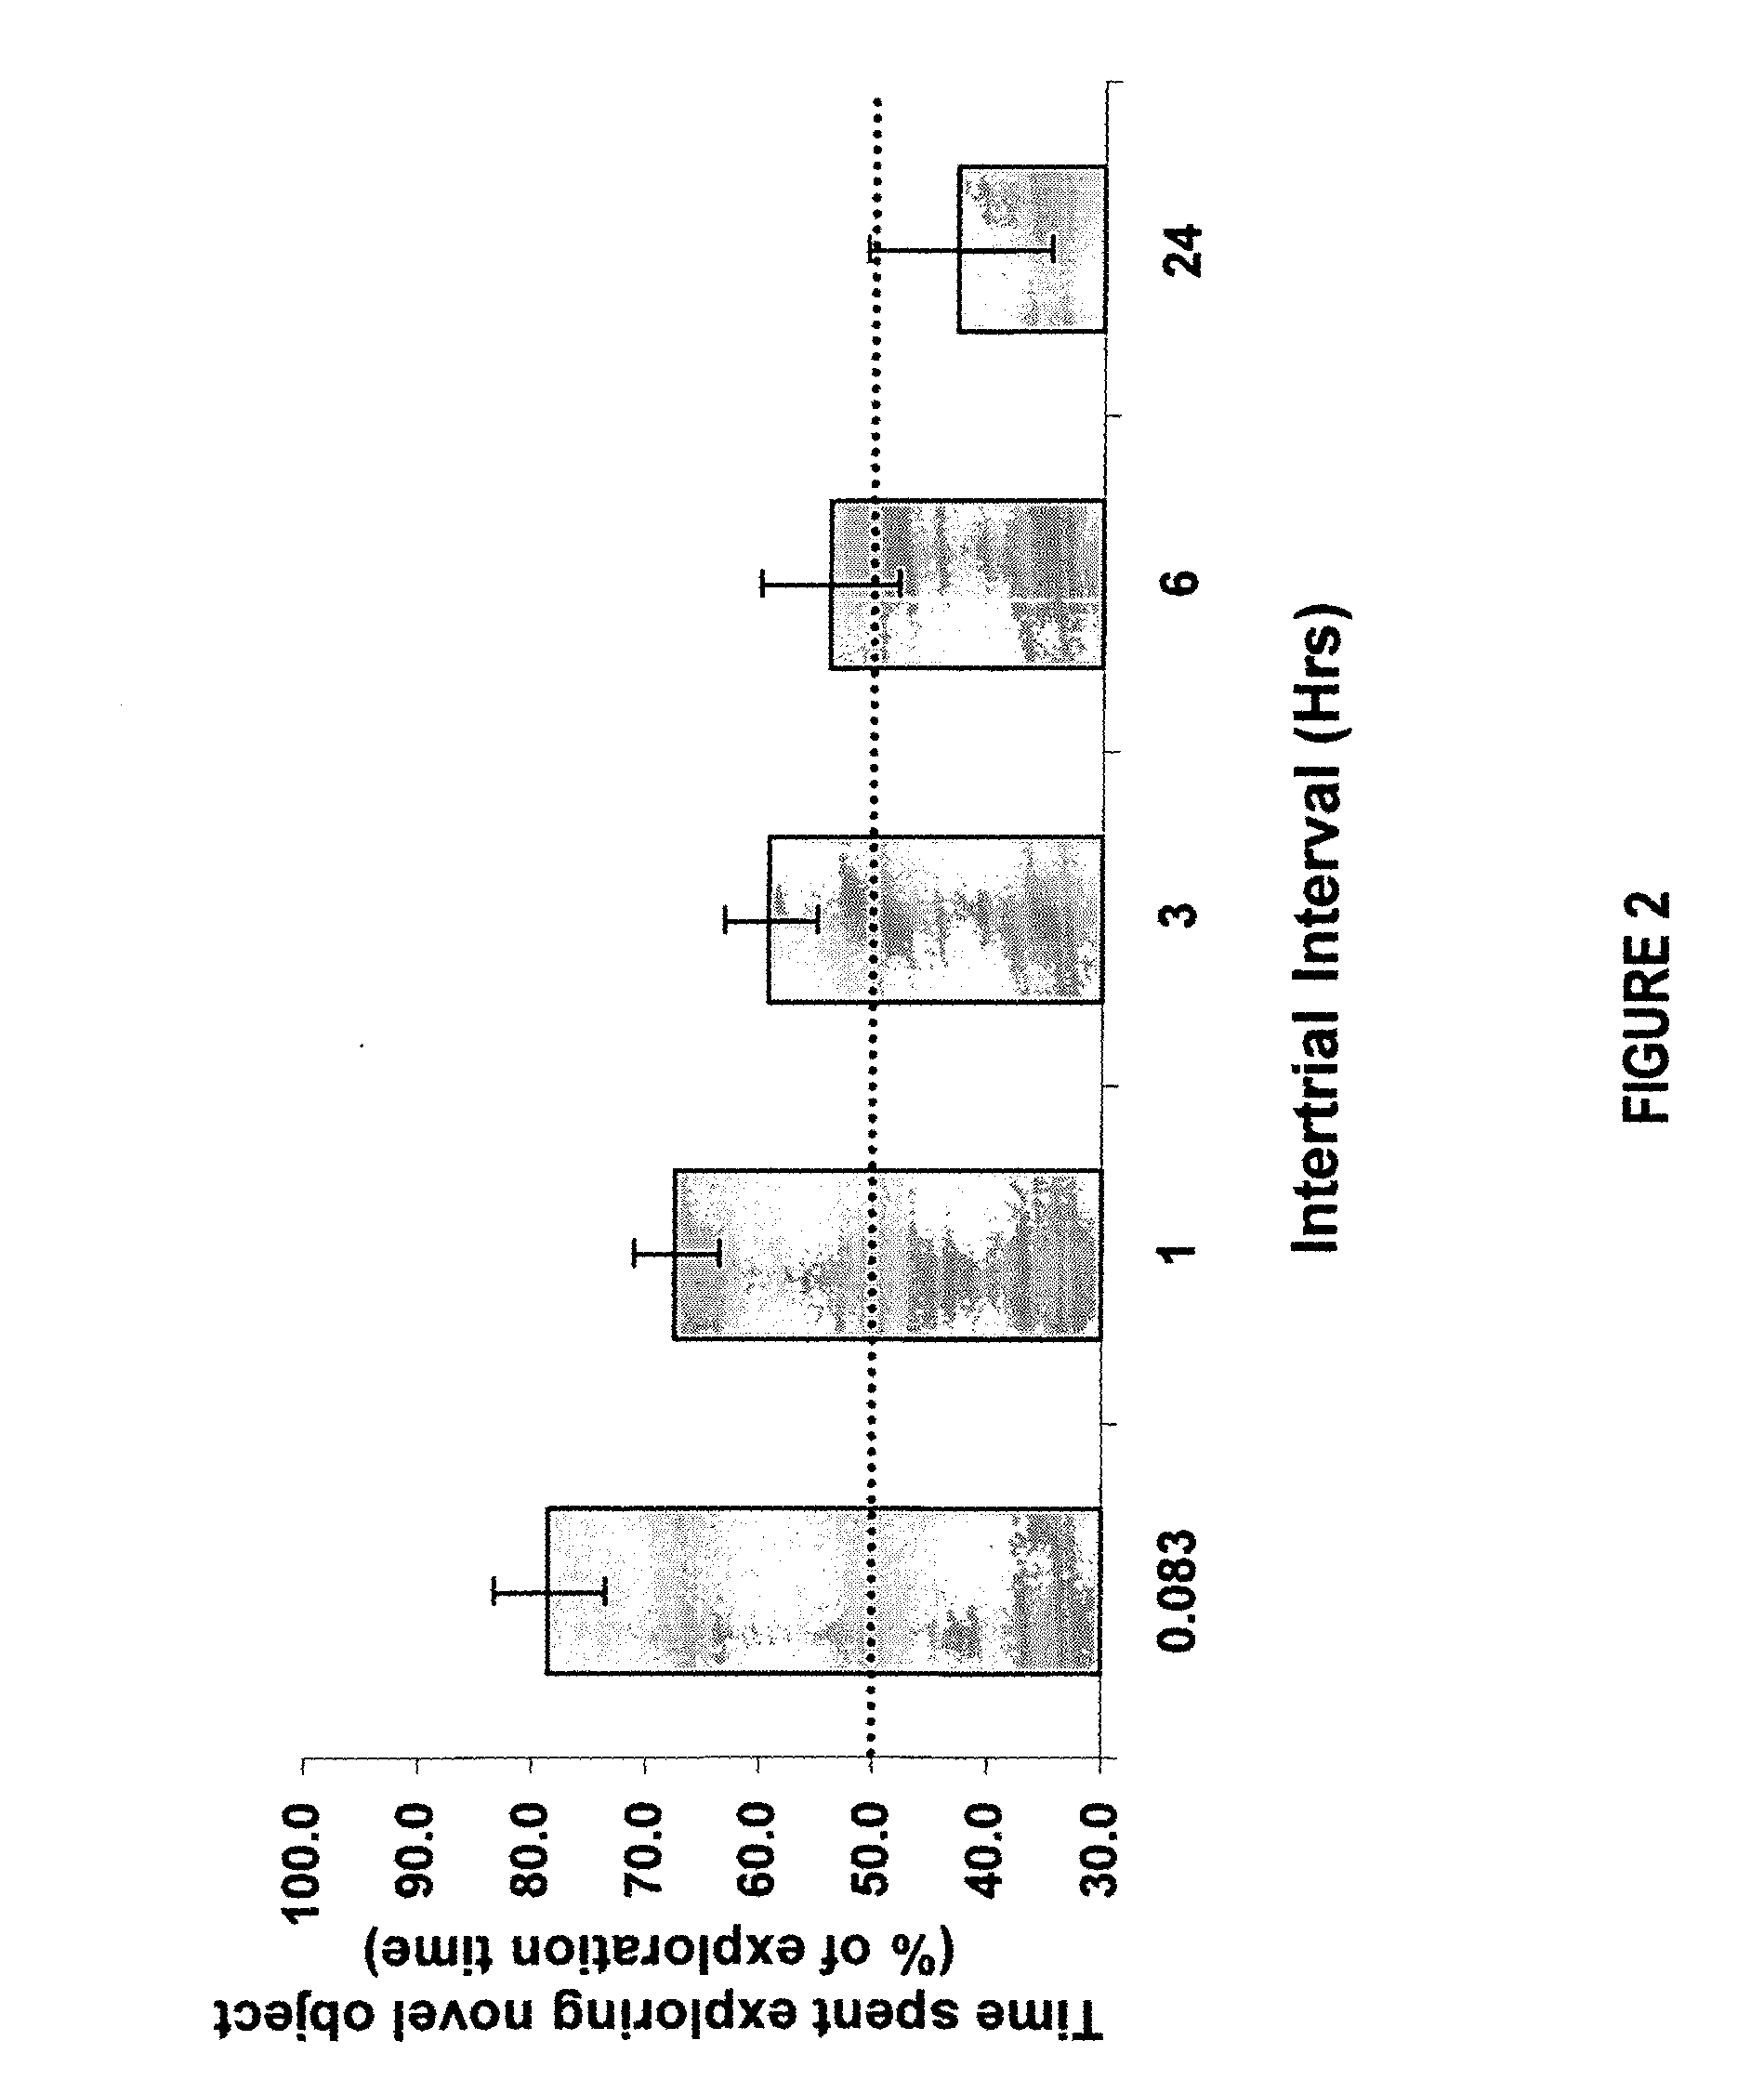 Method for improving cognitive function by co-administration of a GABAB receptor antagonist and an acetylcholinesterase inhibitor